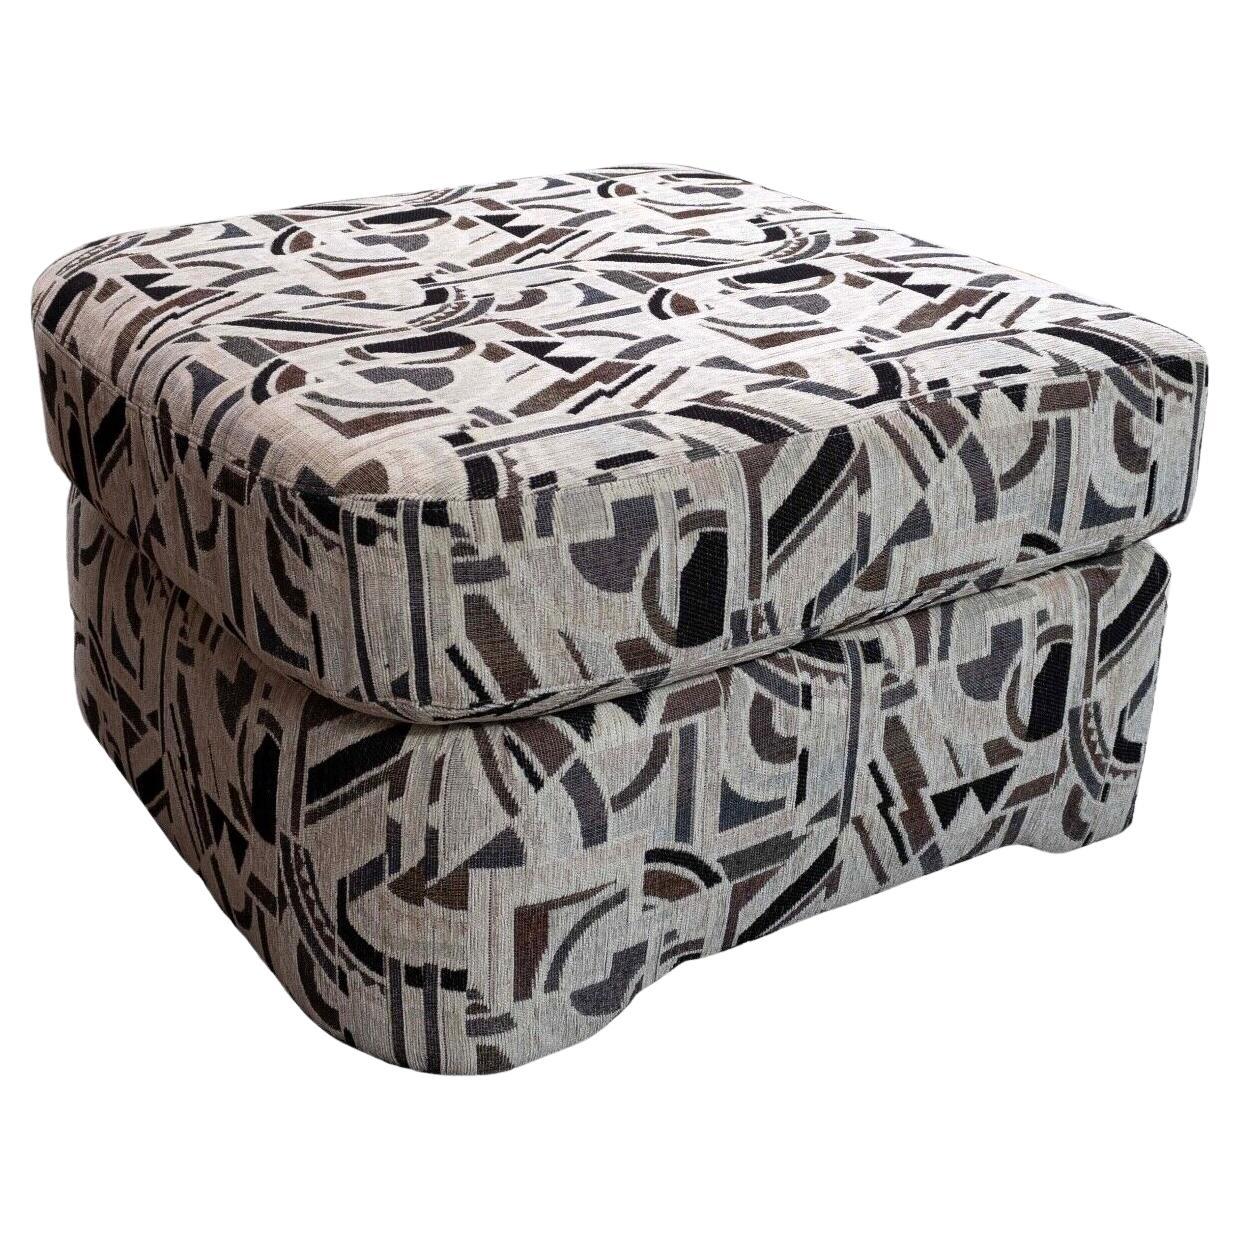 Preview Furniture Corporation Patterned Square Ottoman Contemporary Modern For Sale